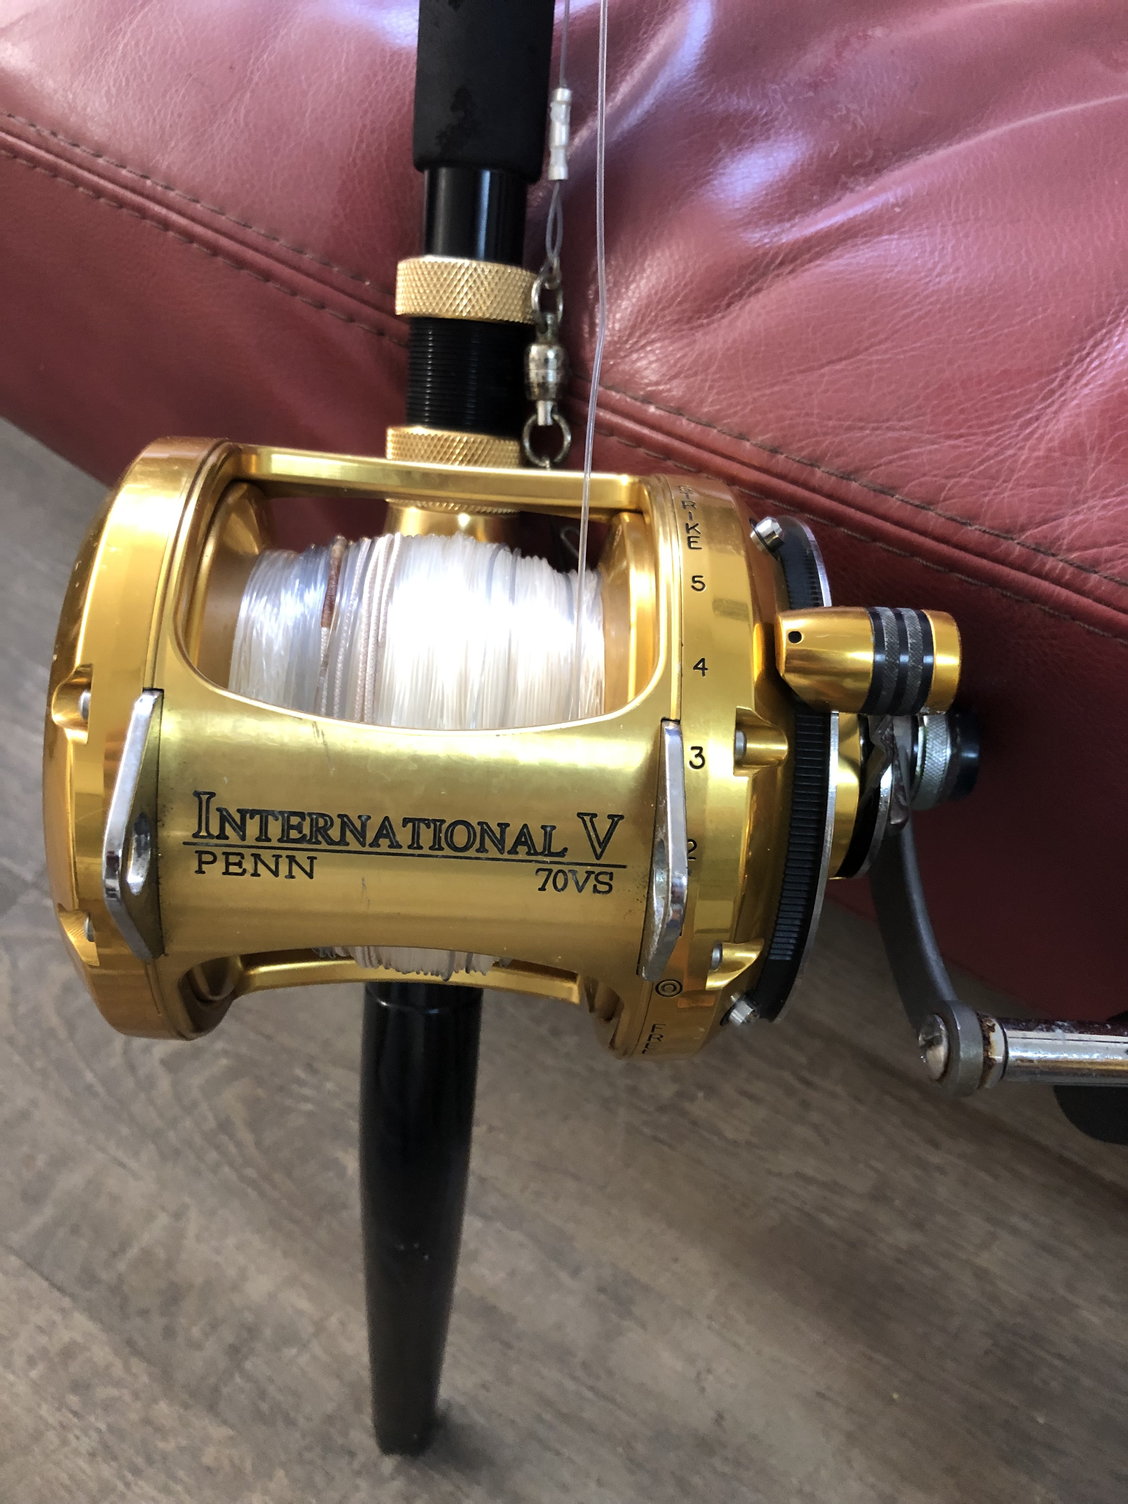 5 Penn 7500SS reels - Made in USA - The Hull Truth - Boating and